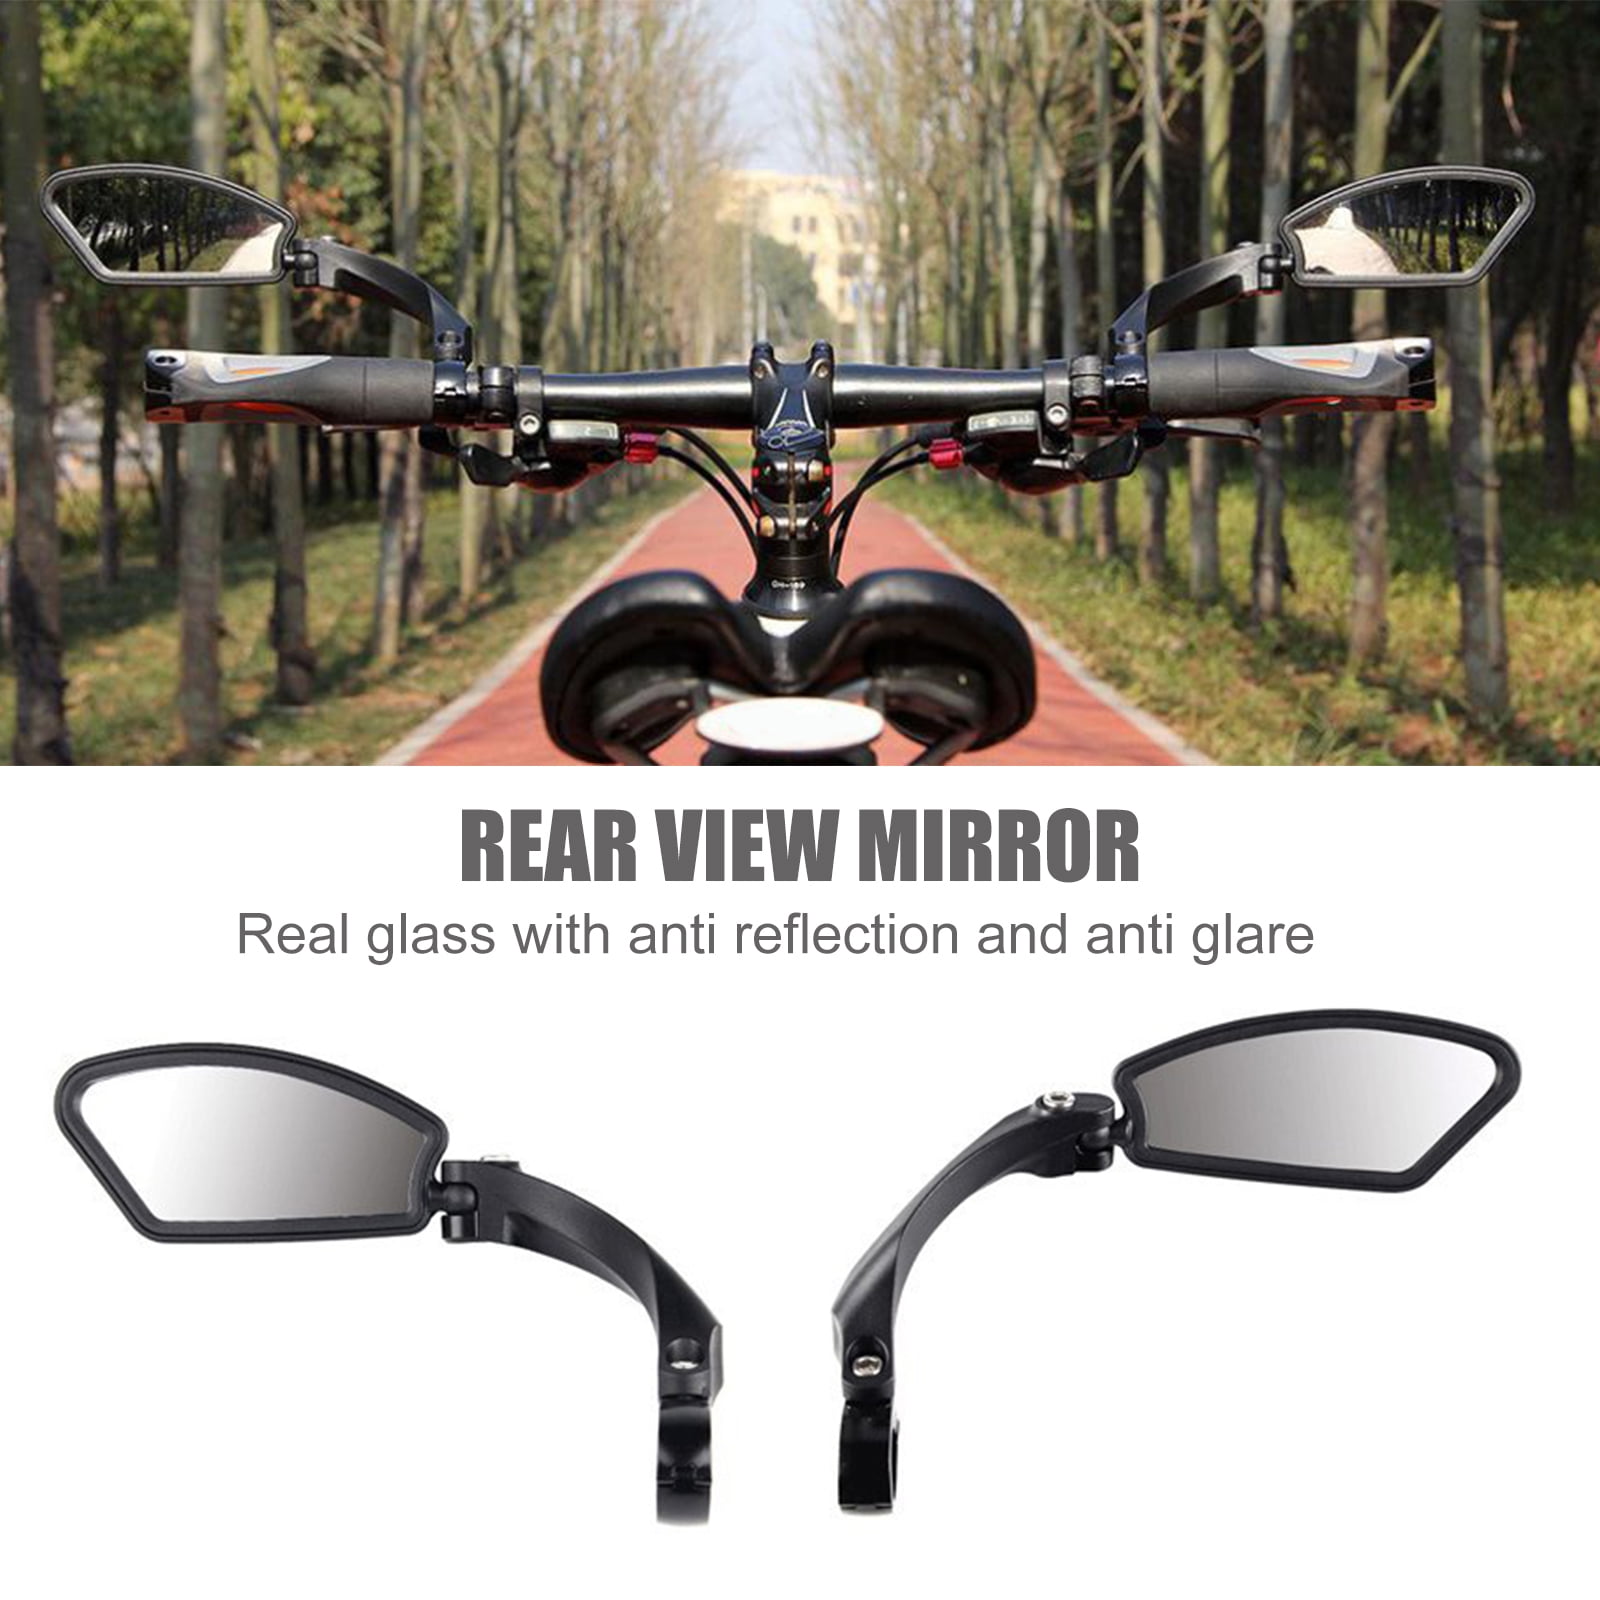 Bestudeer mogelijkheid Voorzitter BICYCLE Rear View Mirror - Right Left Mirror Rear View 360 Rotation,  Adjustable HD Anti-Shock Glass Lens, Cycling Wide Range Back Sight Left  Right Mirrors - Walmart.com